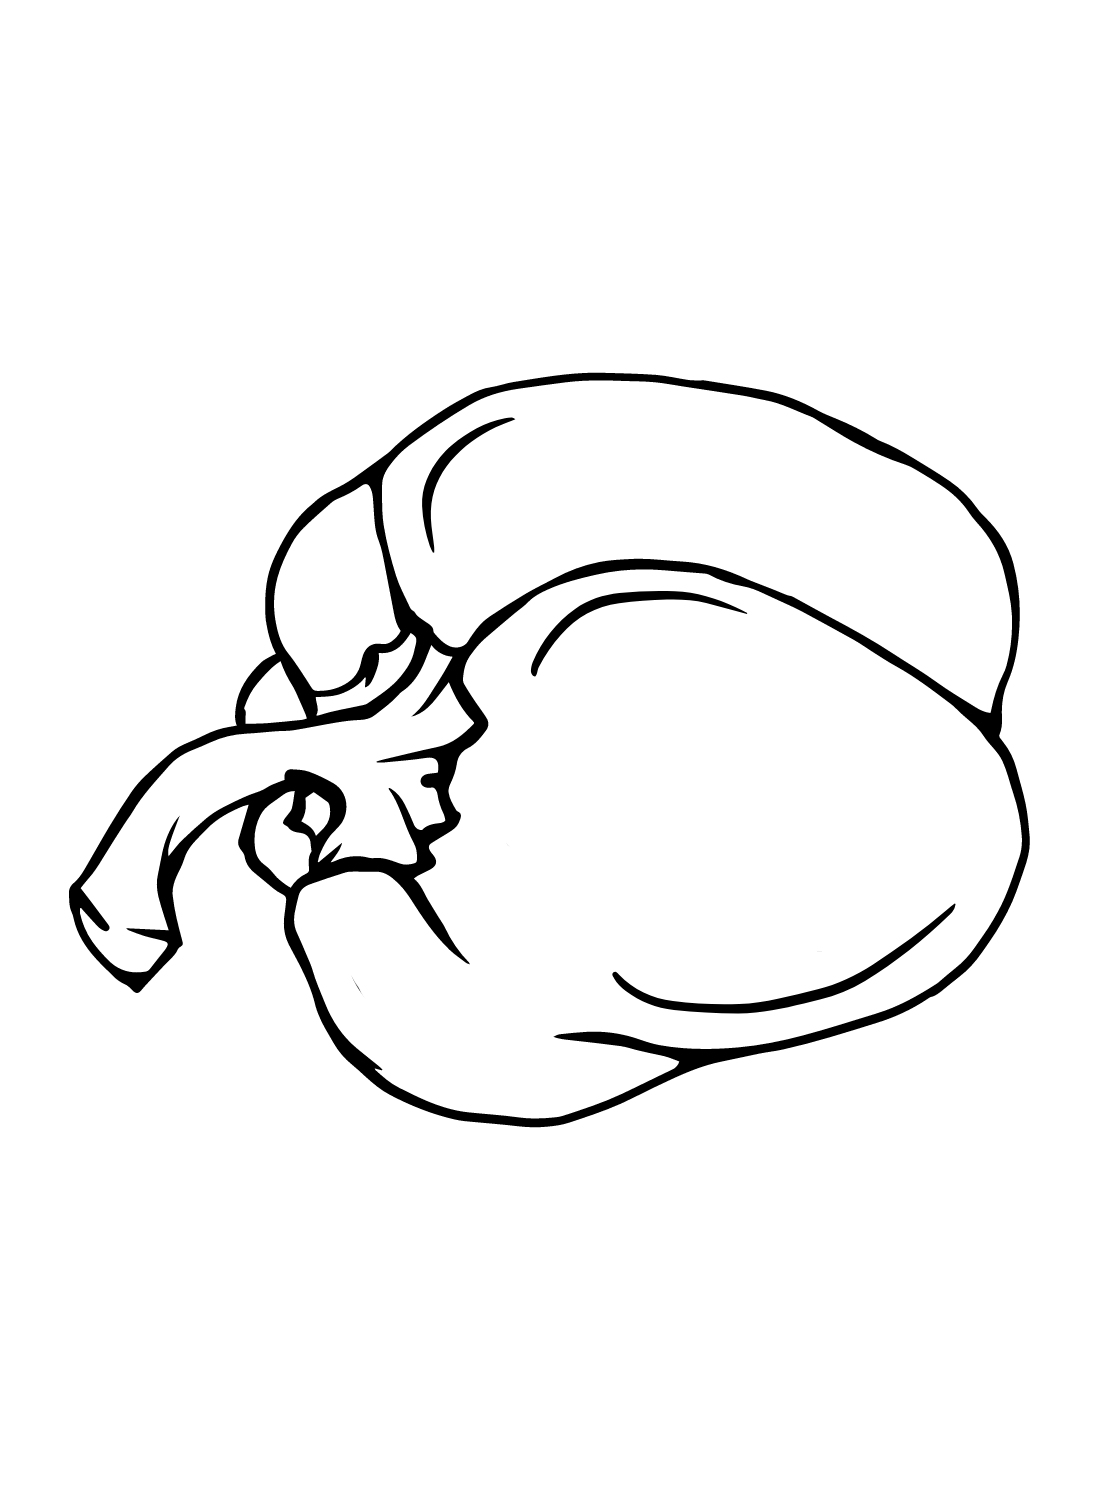 Bell Pepper Drawing Coloring Page